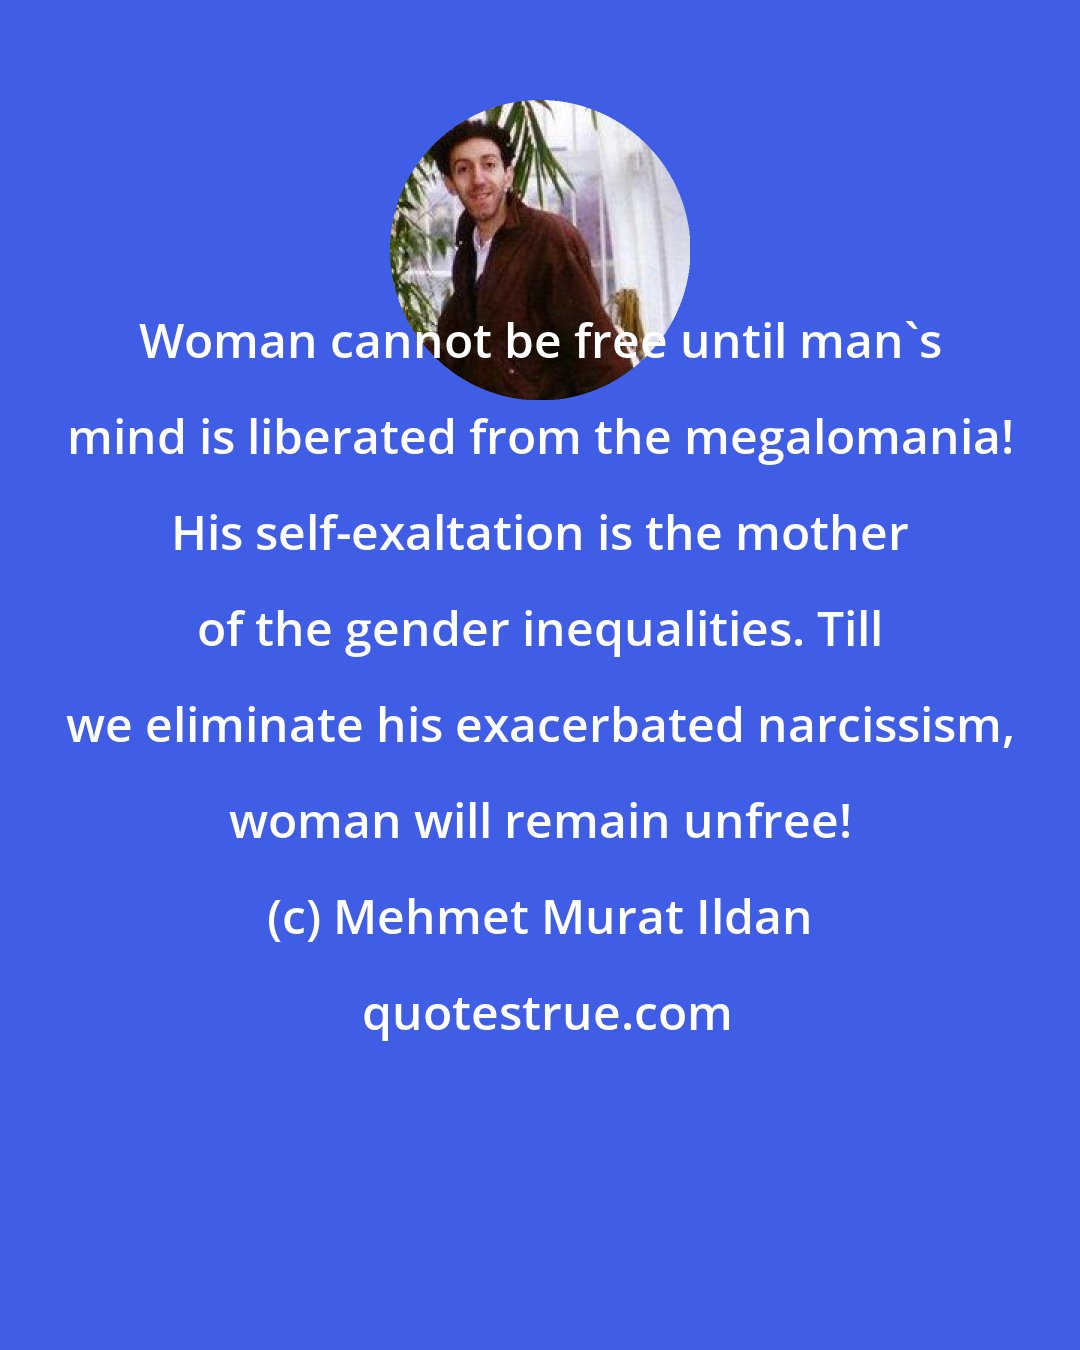 Mehmet Murat Ildan: Woman cannot be free until man's mind is liberated from the megalomania! His self-exaltation is the mother of the gender inequalities. Till we eliminate his exacerbated narcissism, woman will remain unfree!